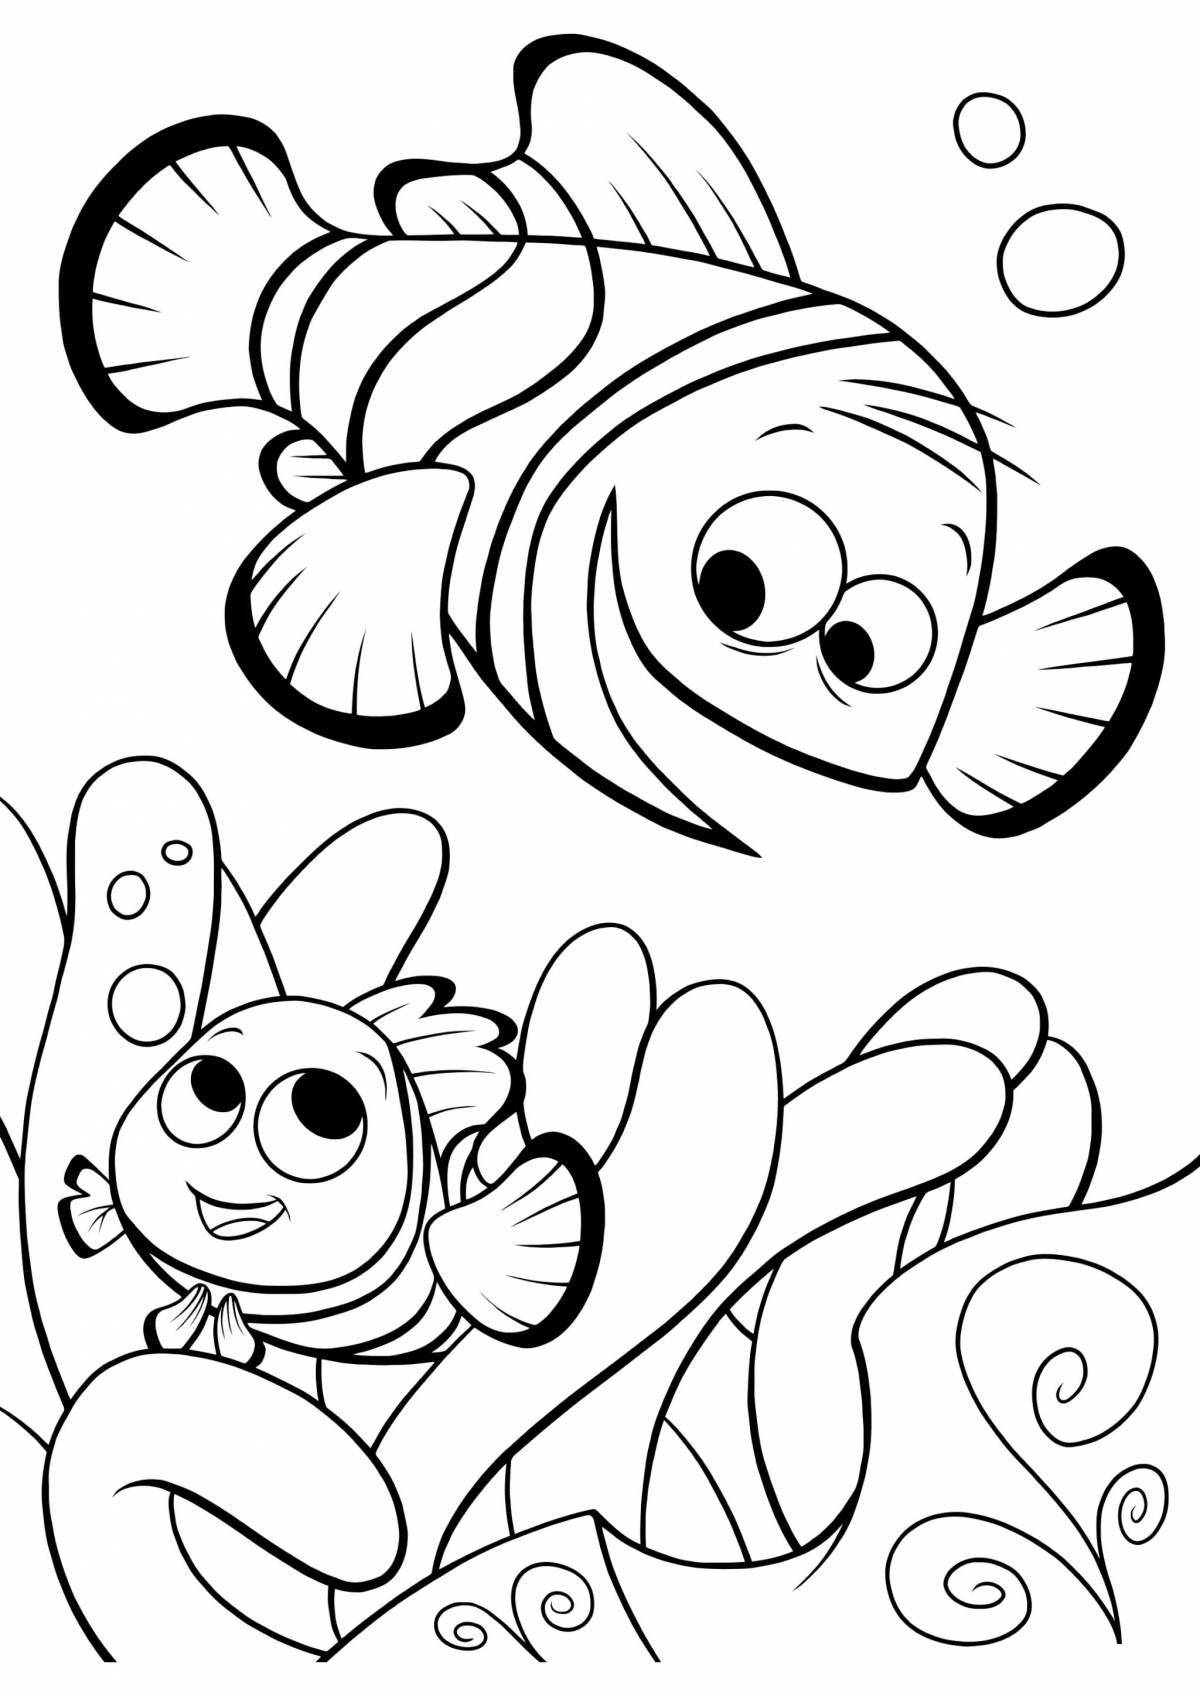 Outstanding clown fish coloring page for kids